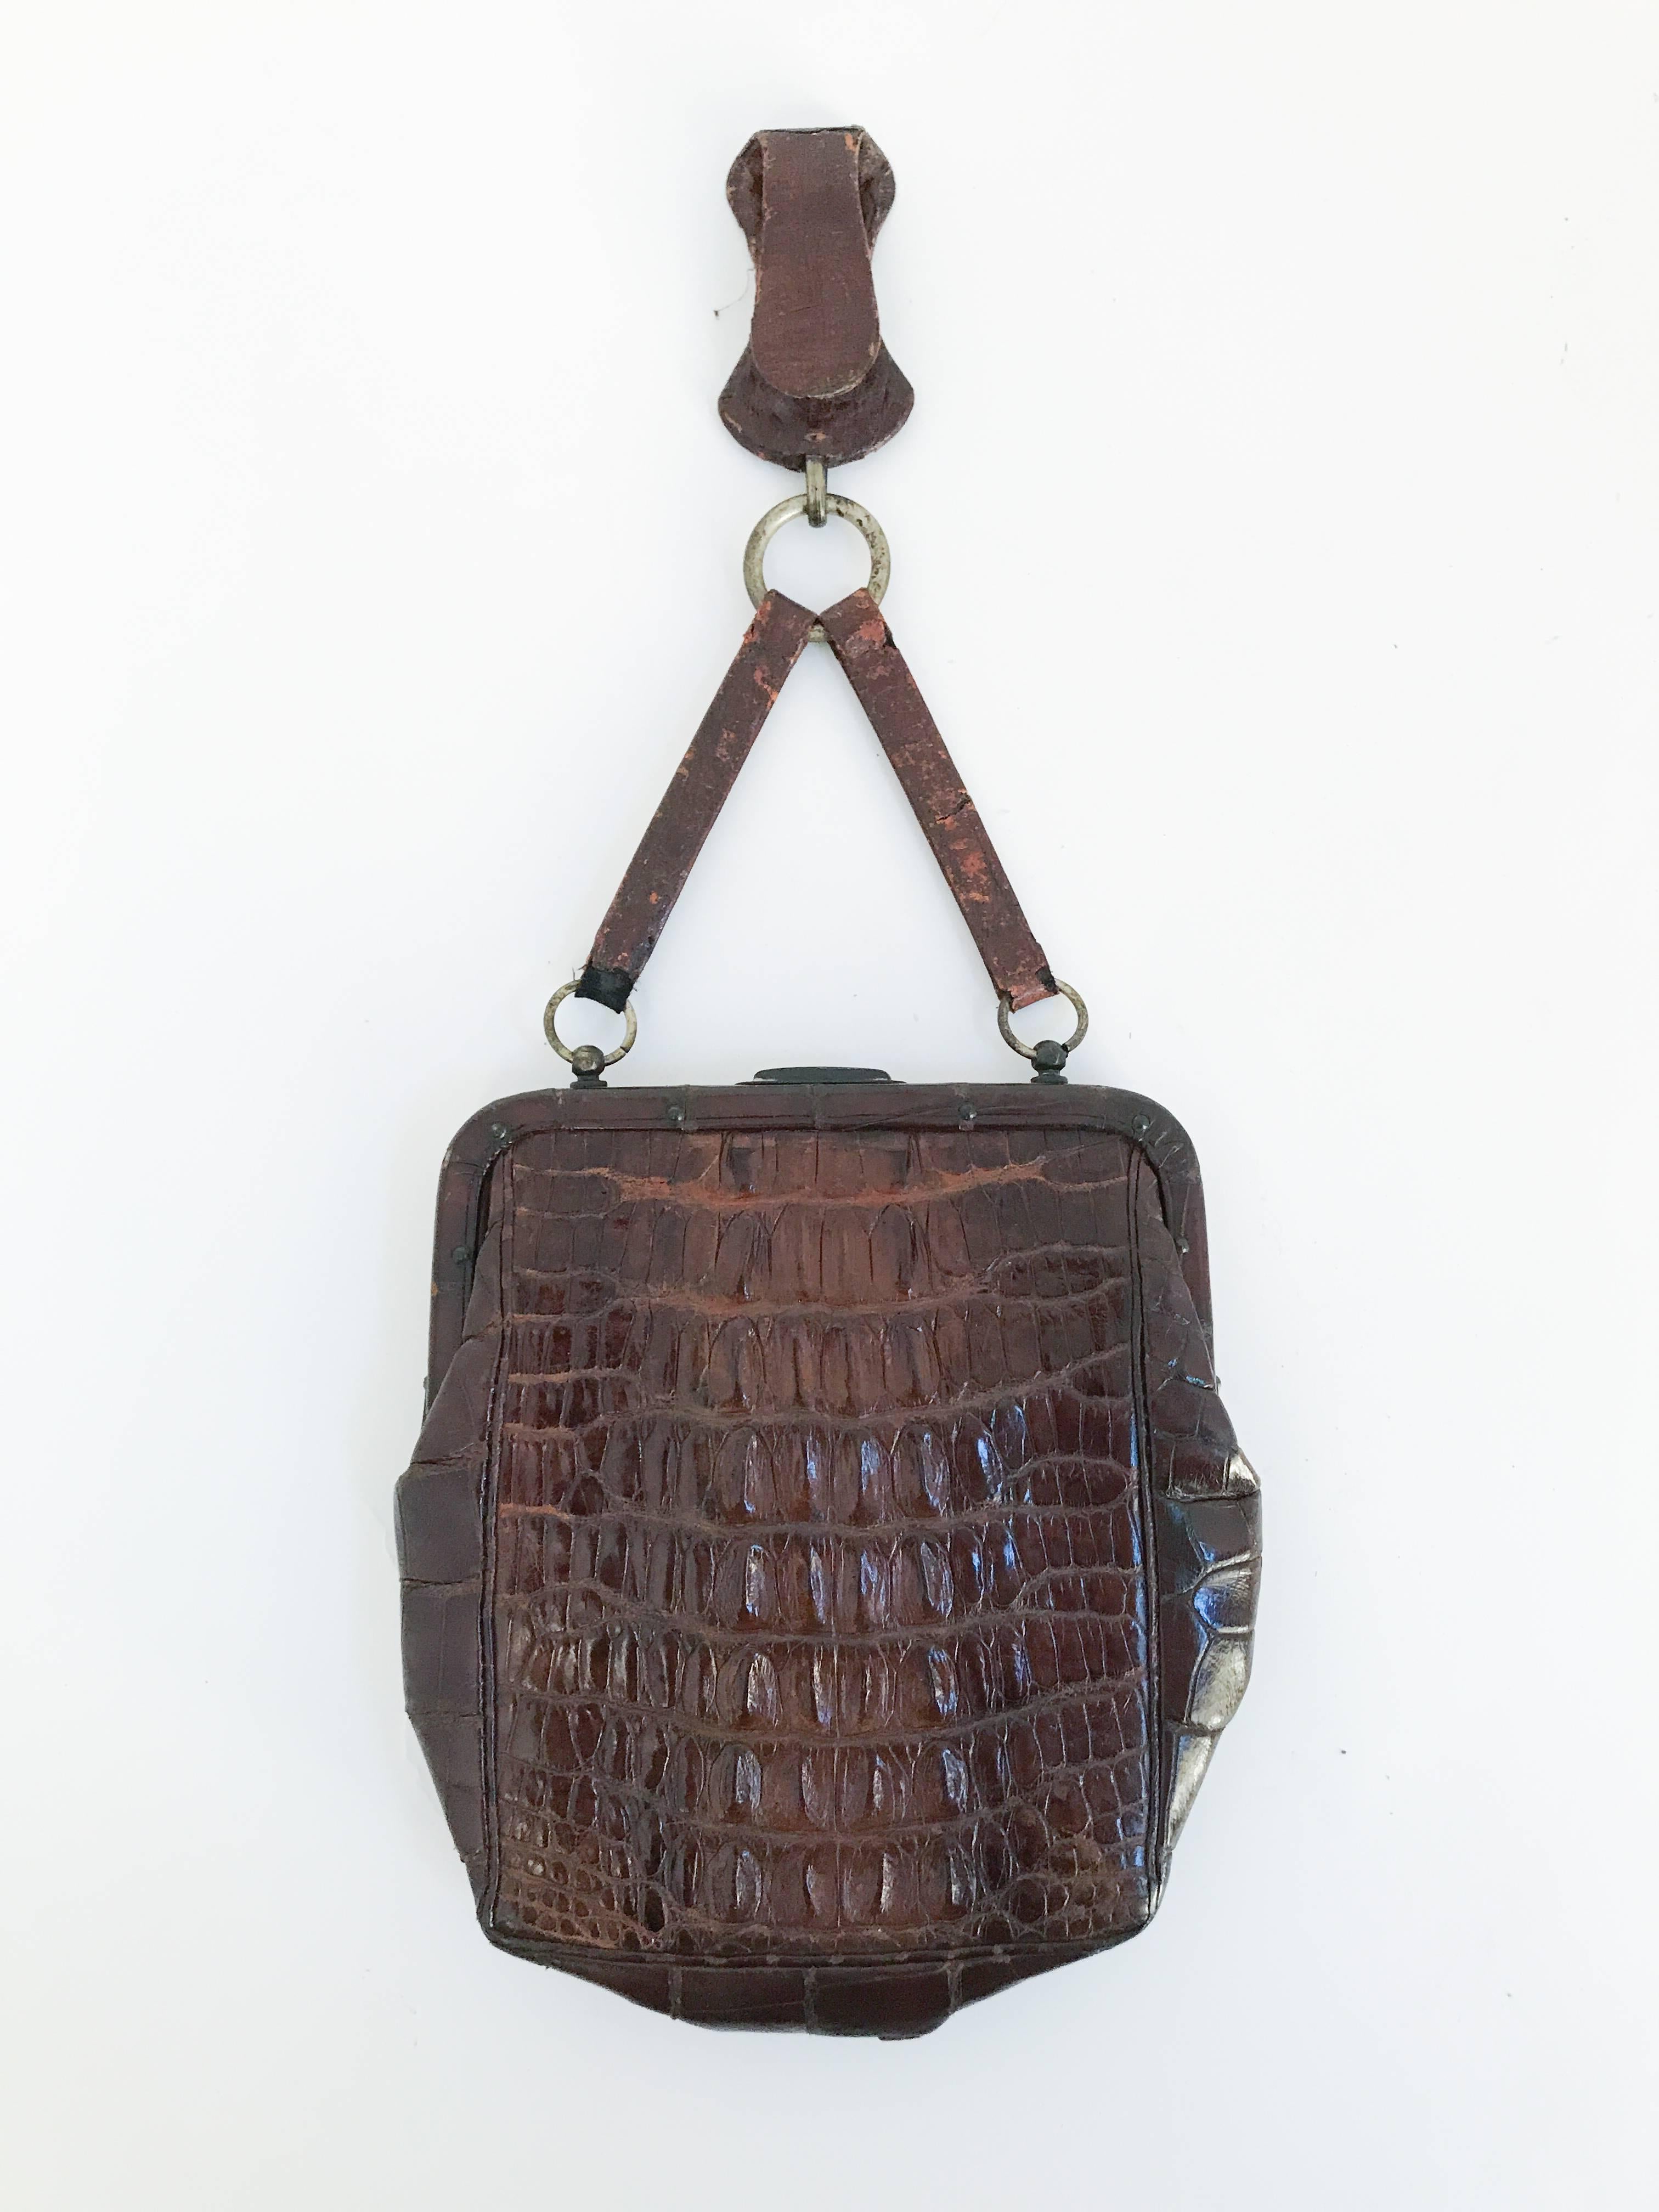 1910s Edwardian Alligator Chatelaine  Purse. Brown Alligator Chatelaine purse with strap and clip. Made to be clipped on to a belt.